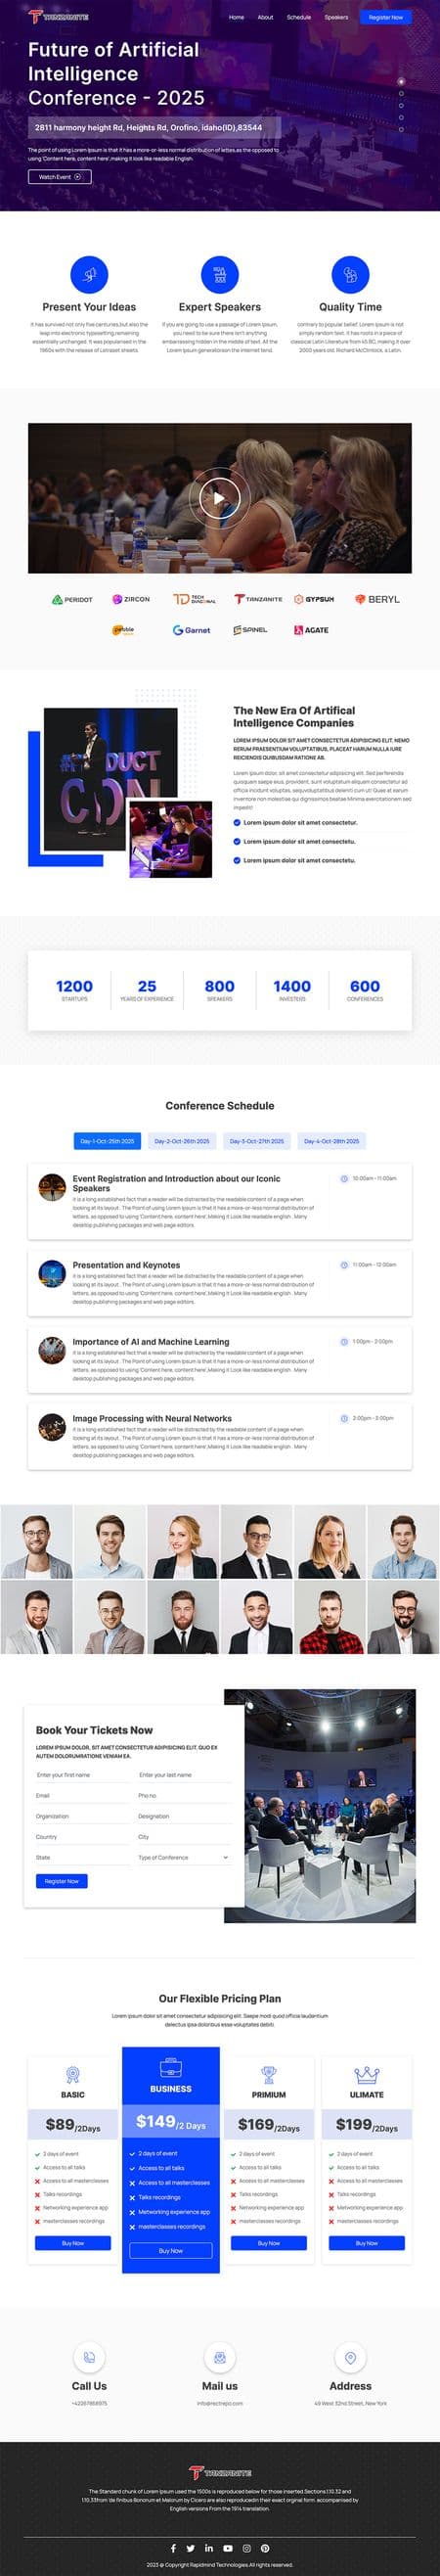 Tanzanite - Event and Conference Landing Pages Image 9